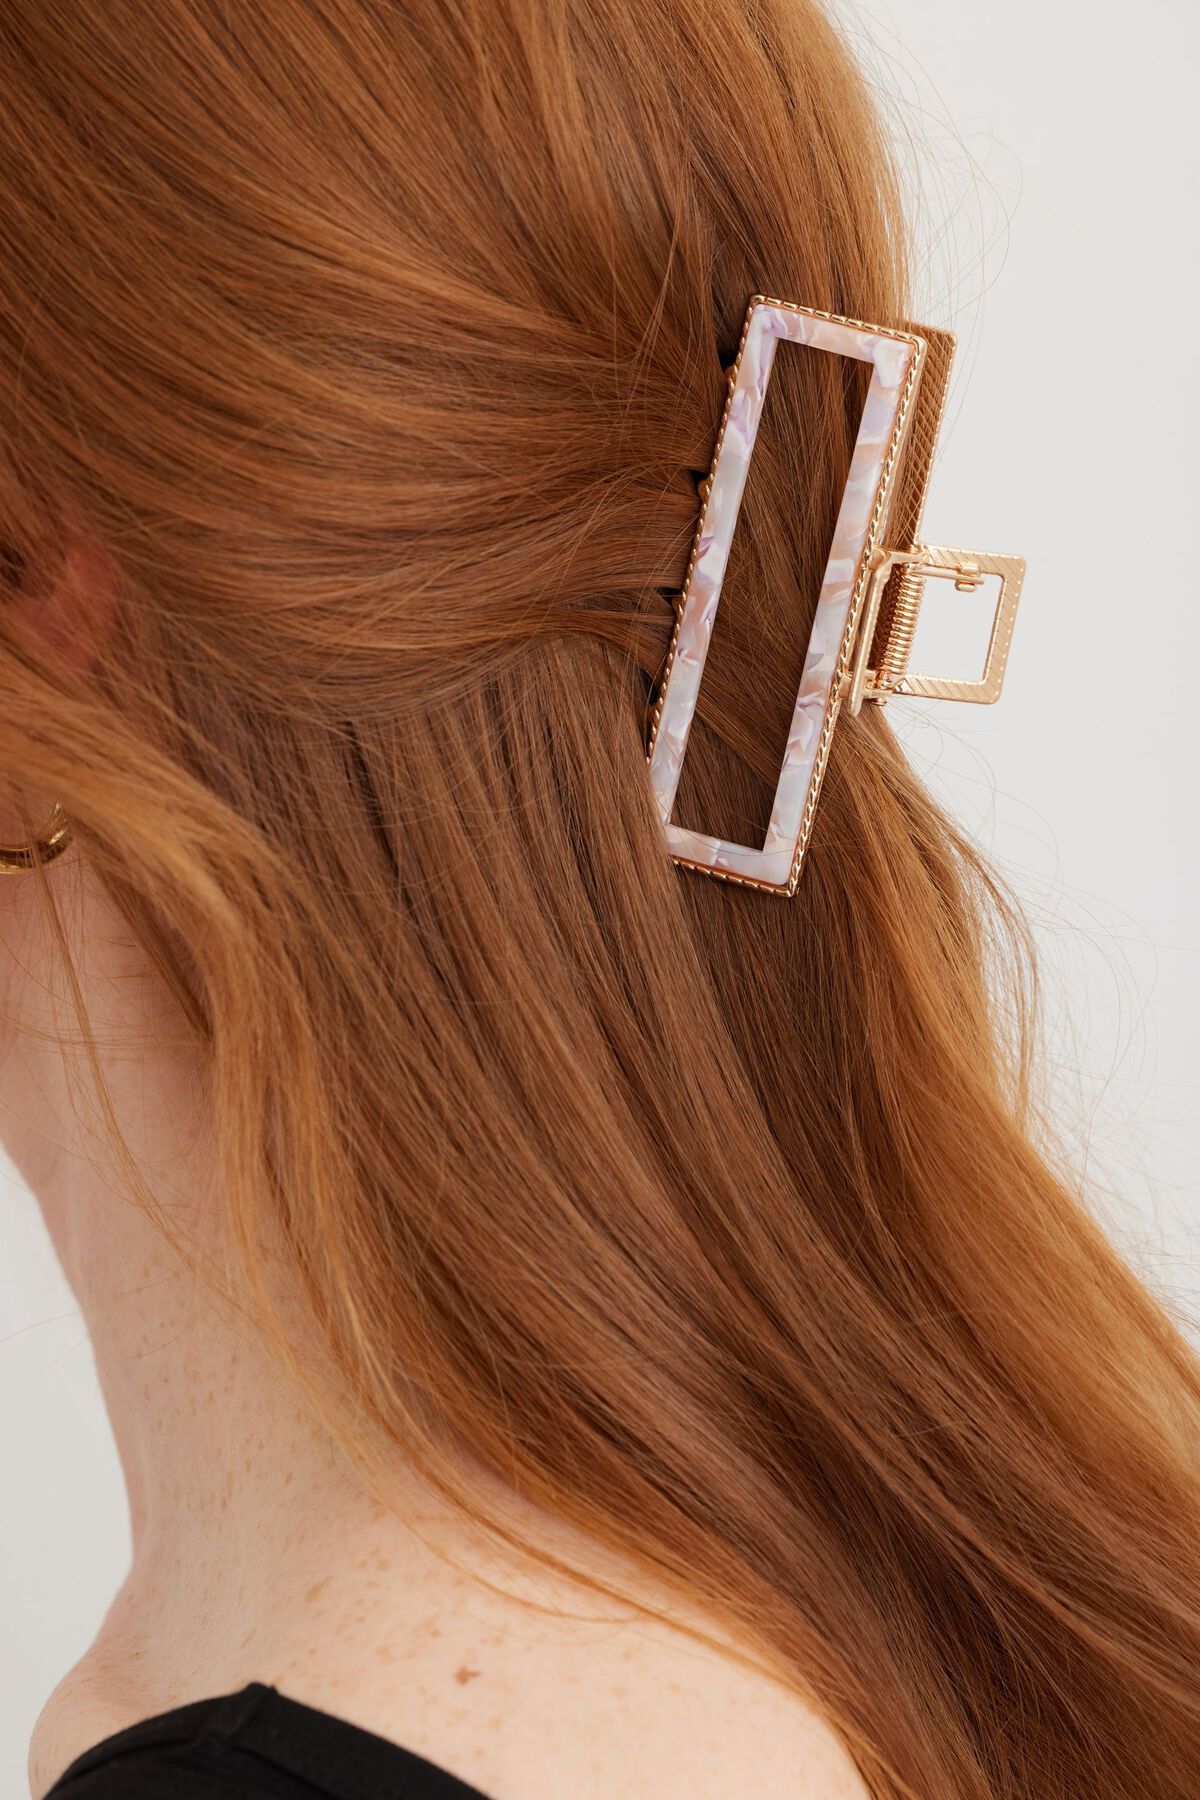 Dynamite Metal Rectangle Claw Hair Clip. 3